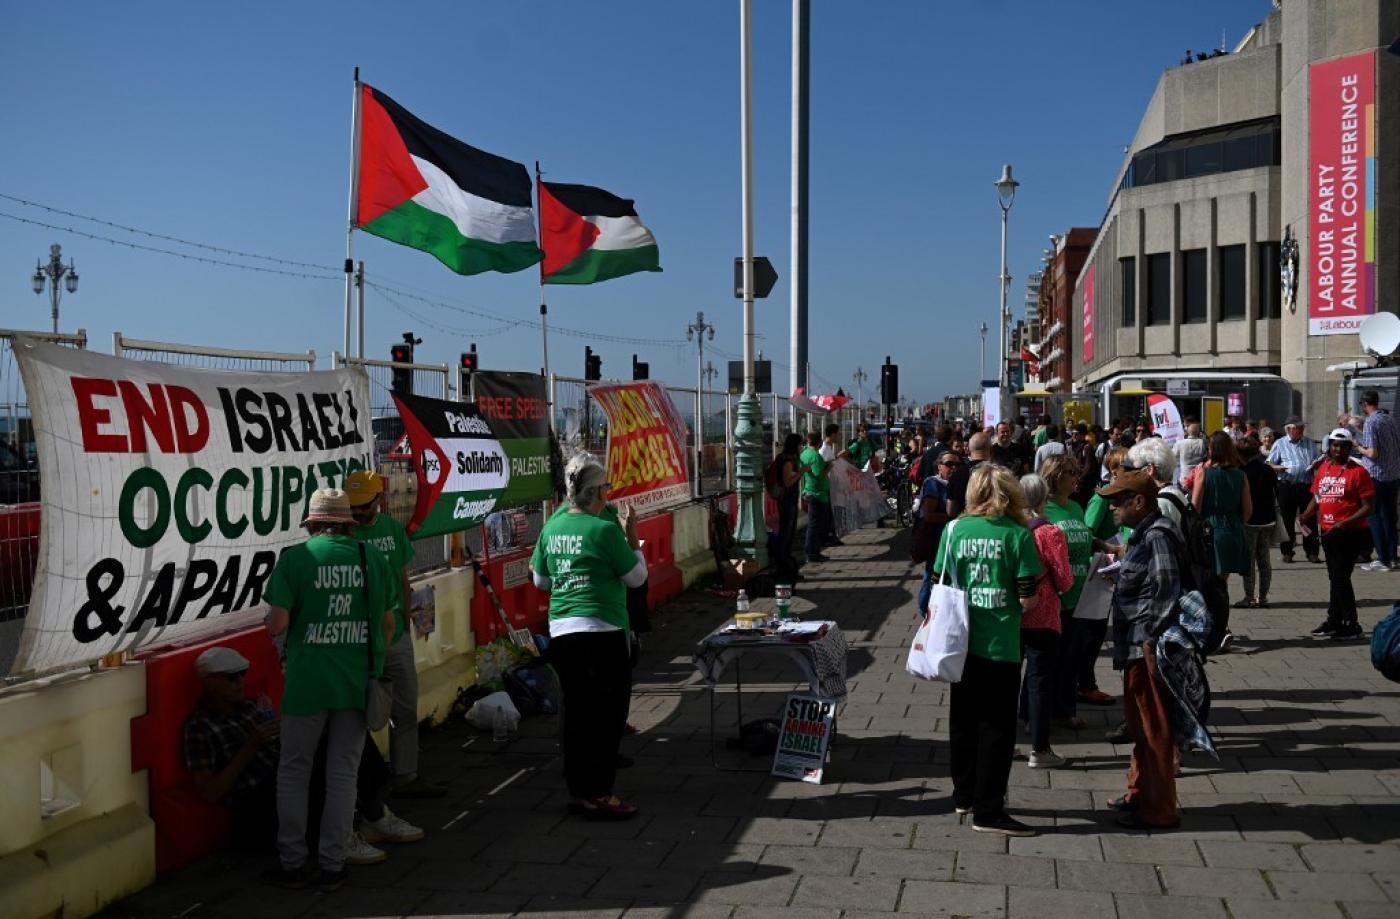 Demonstrators protest outside the Labour party conference in Brighton, on the south coast of England on 21 September 2019 (AFP)